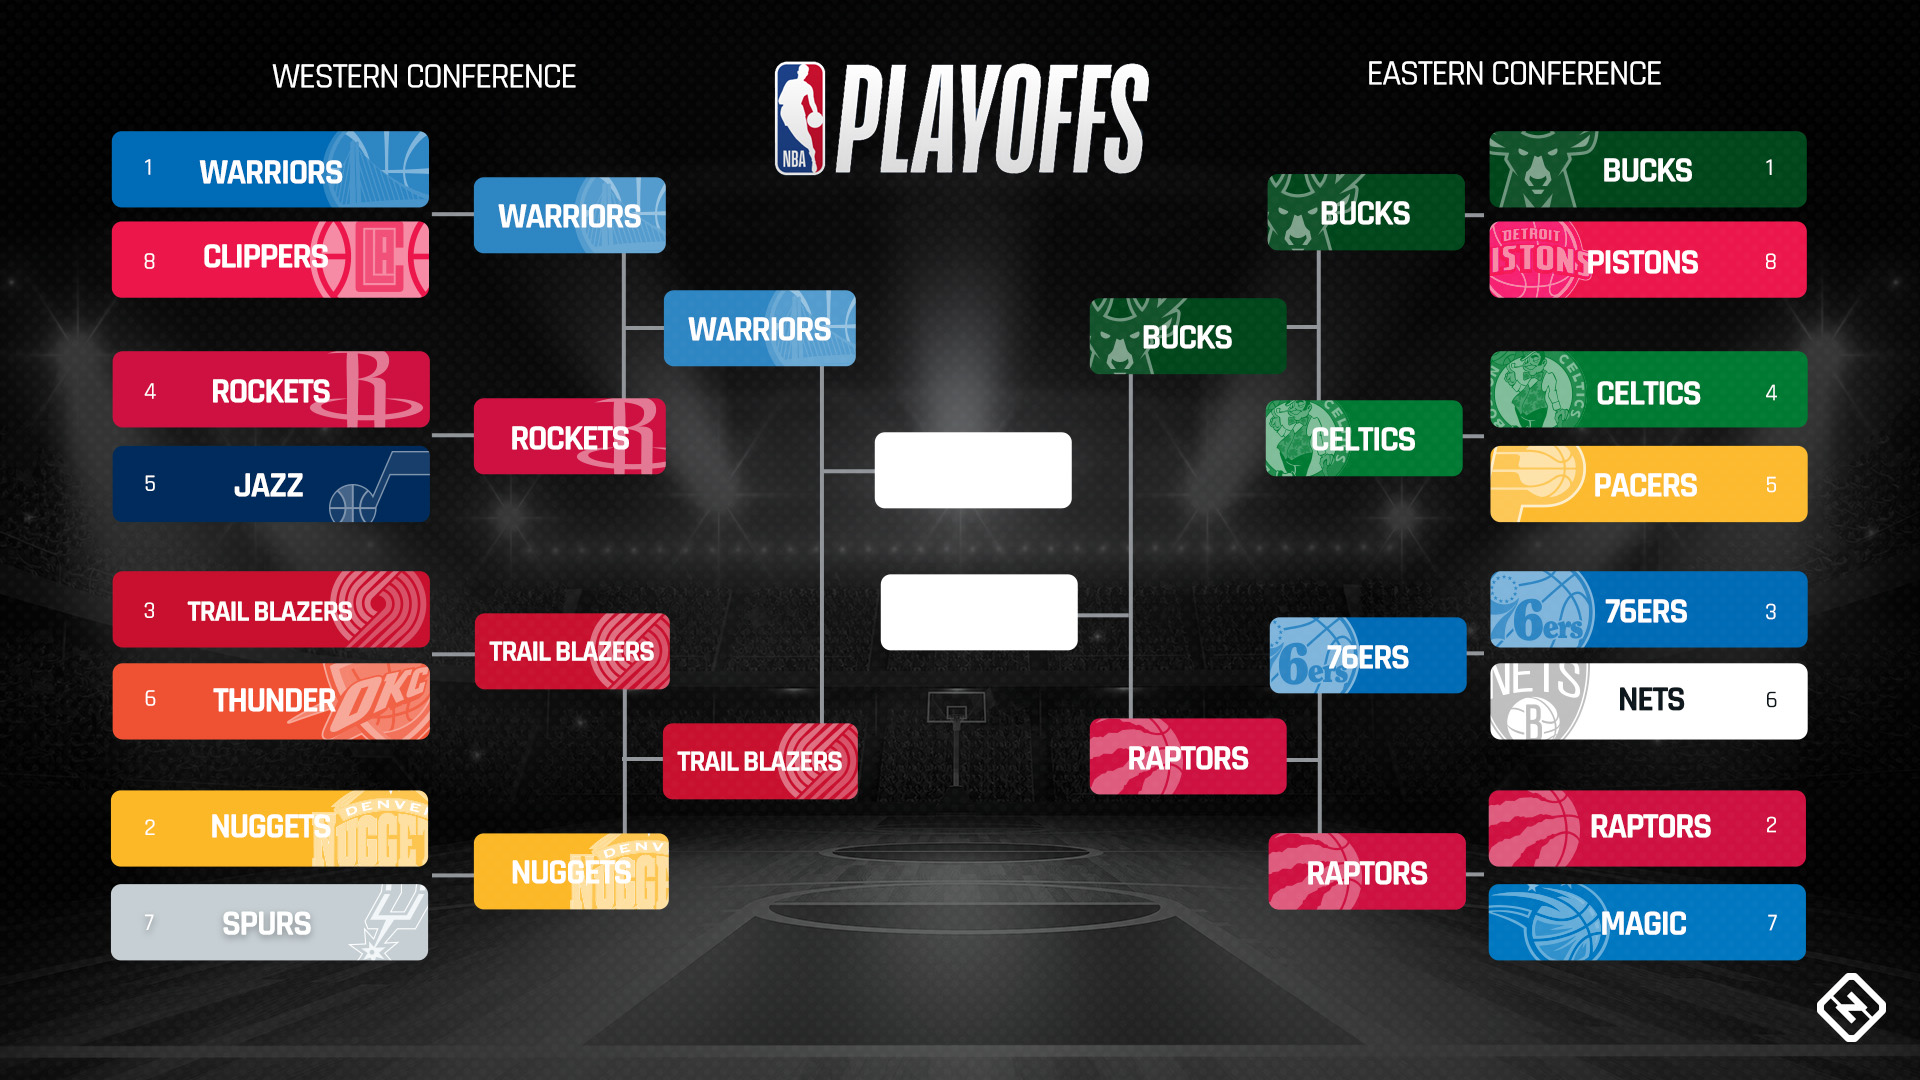 NBA playoffs schedule 2019: Full bracket, dates, times, TV channels for